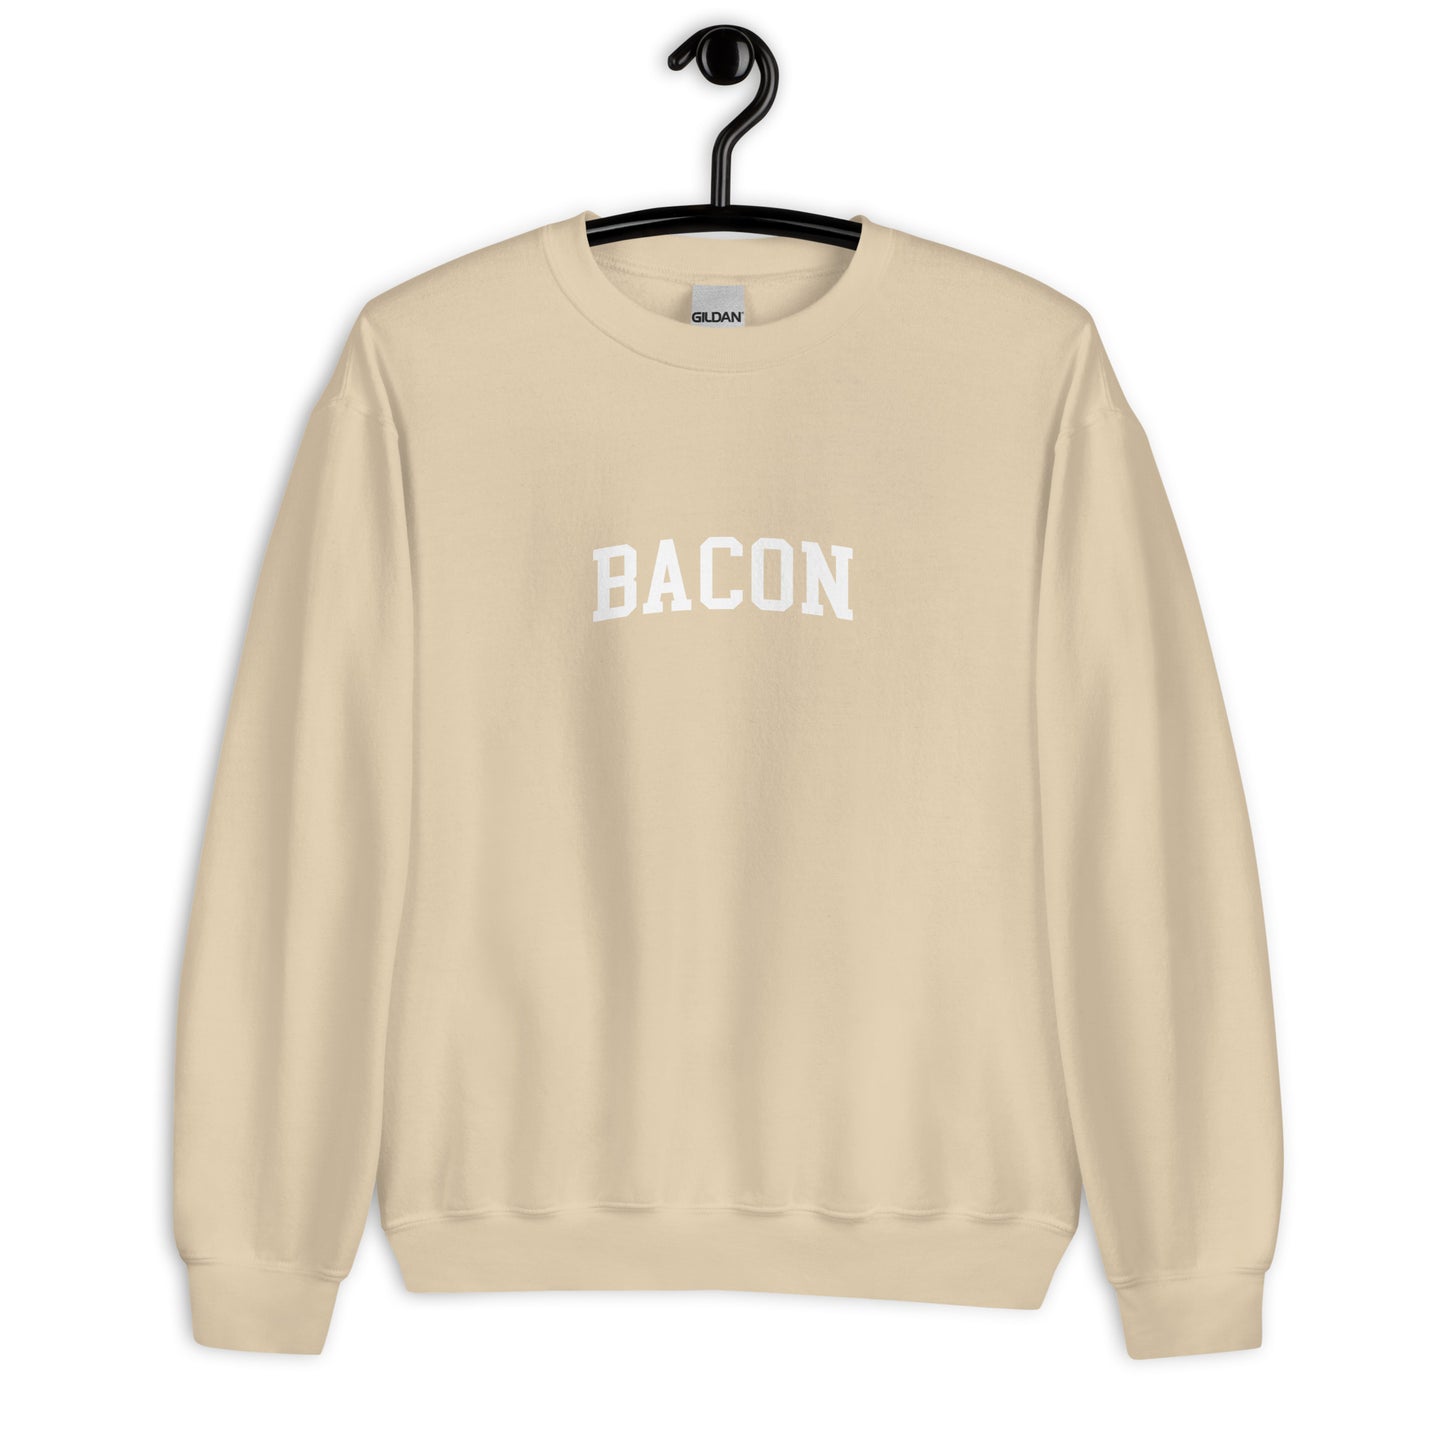 Bacon Sweatshirt - Arched Font